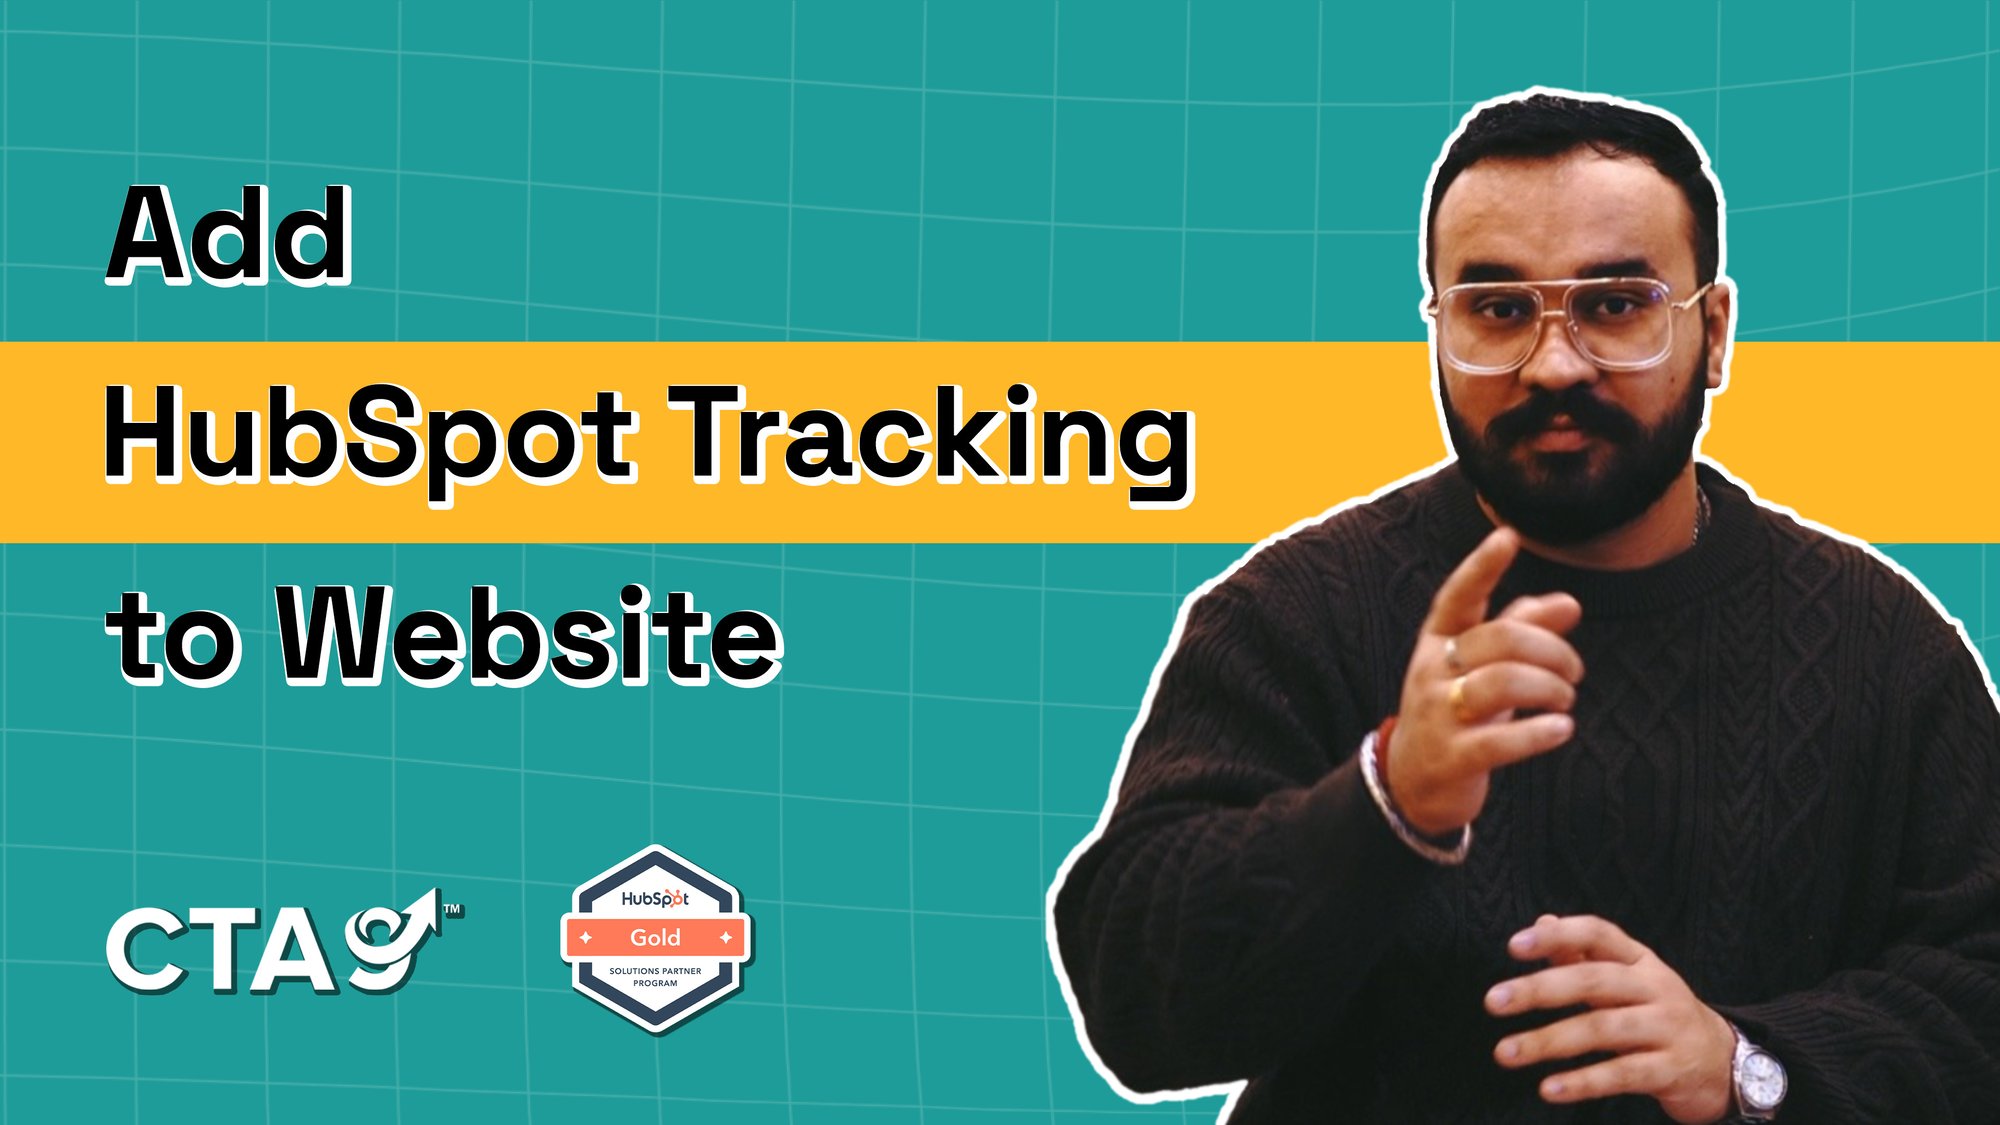 Add HubSpot Tracking to Website